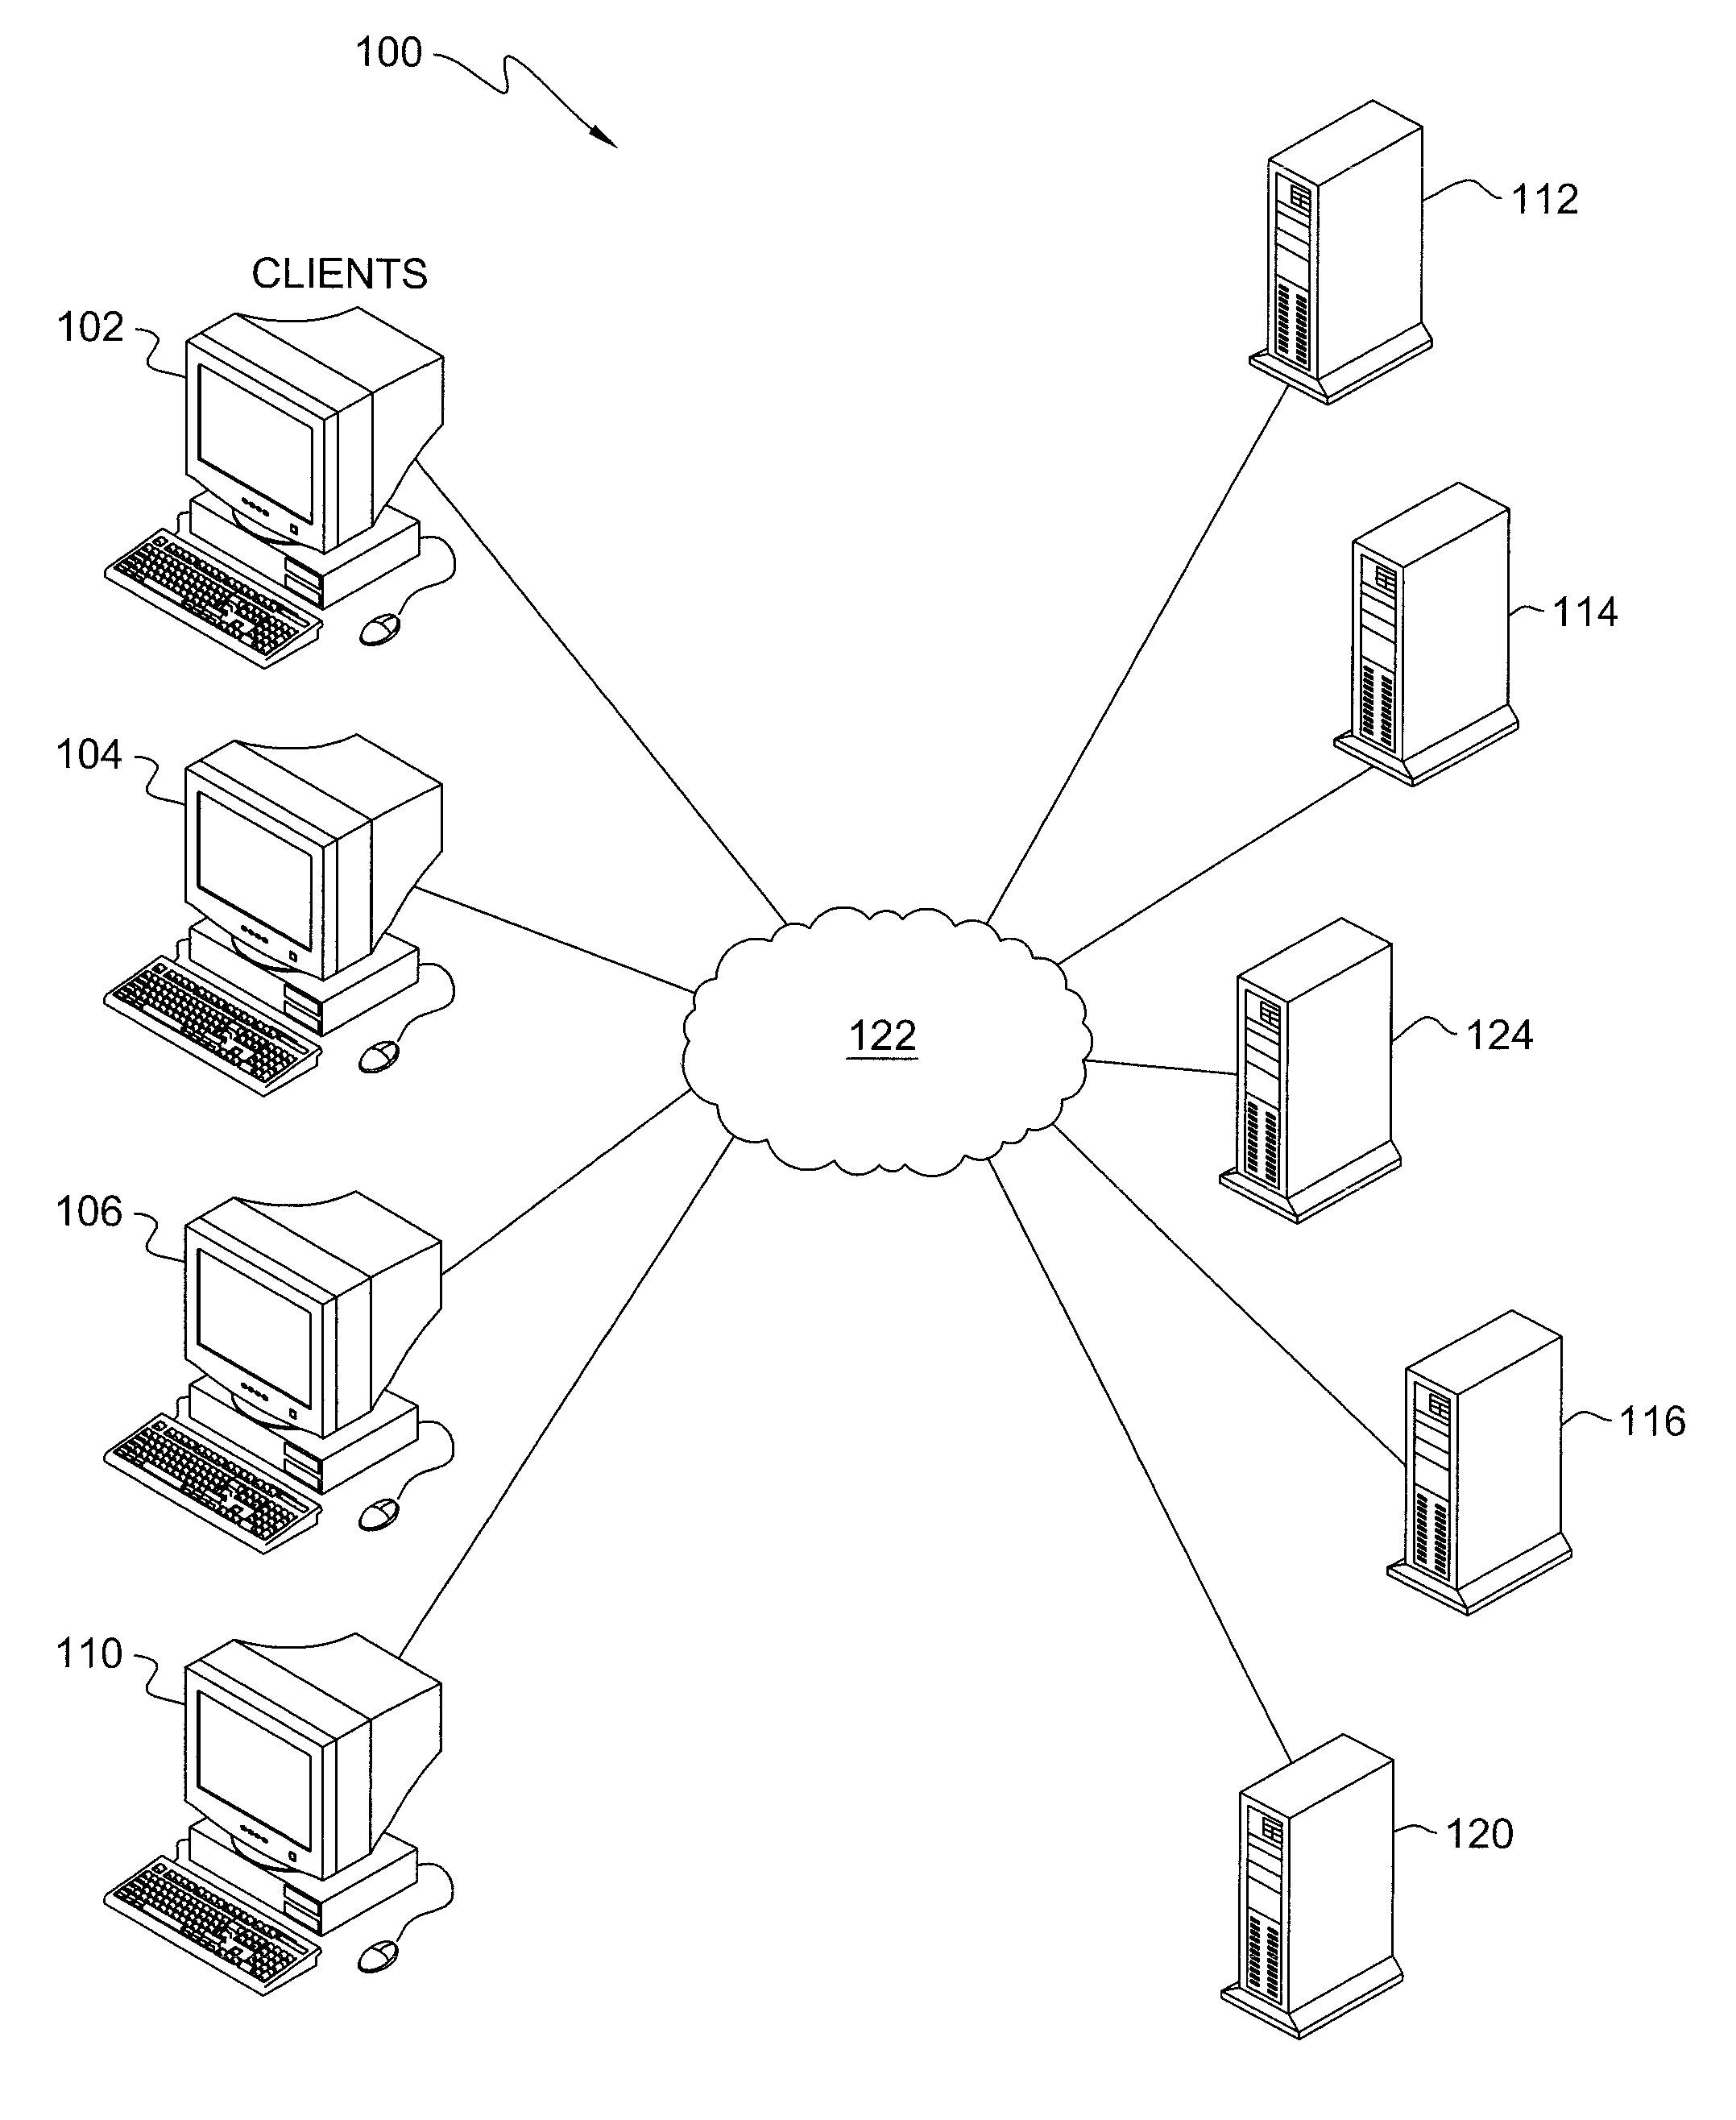 Efficient selection of a messaging multiplexed channel instance